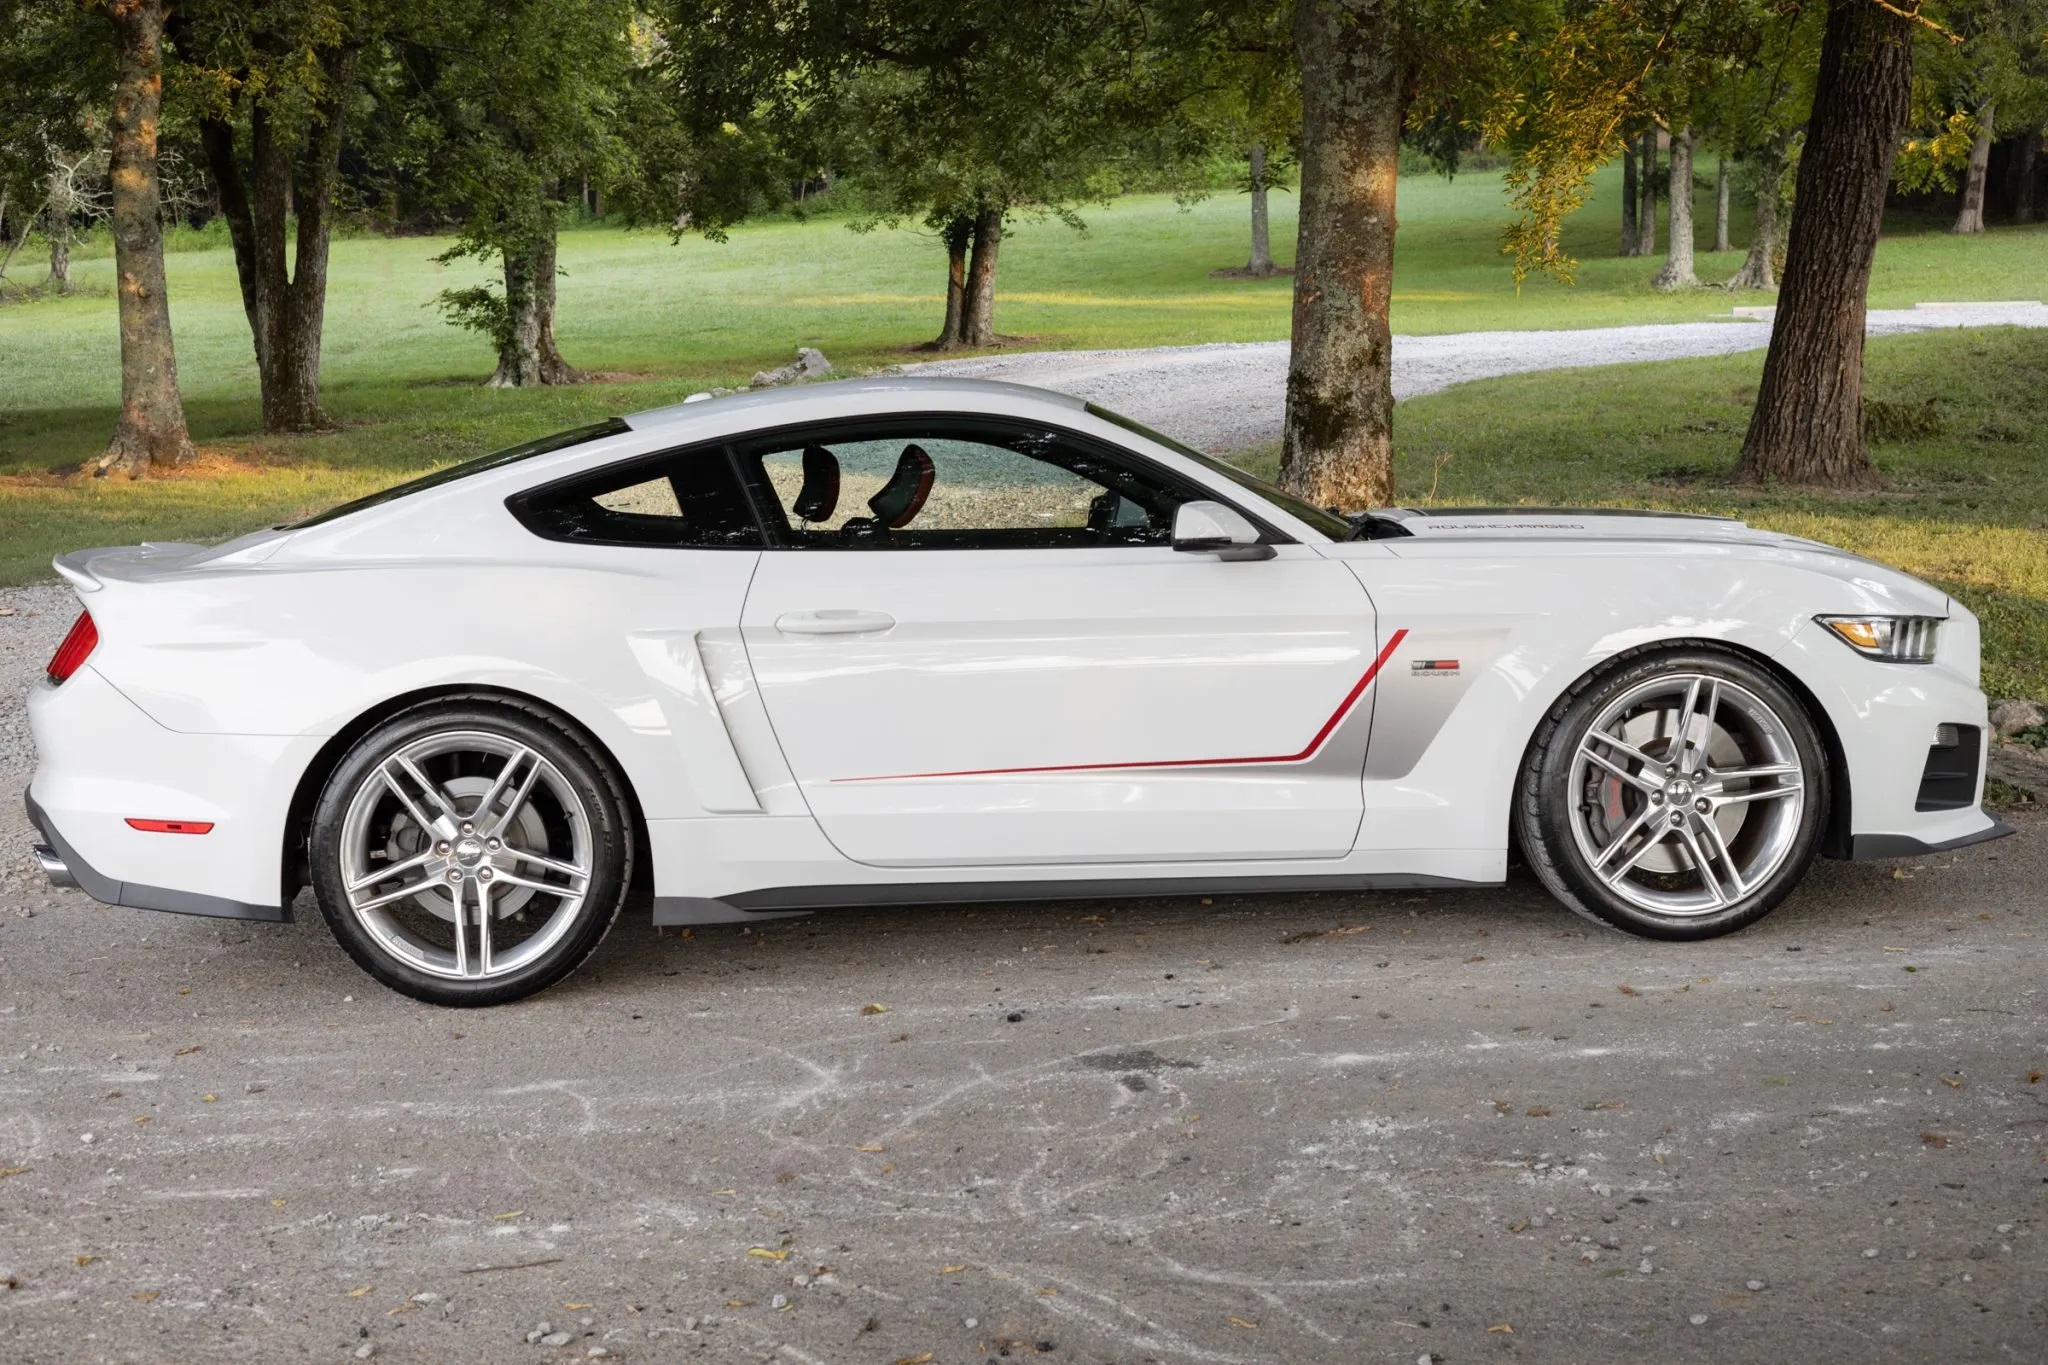 2015 Ford Mustang GT Premium Coupe Roush Stage 3